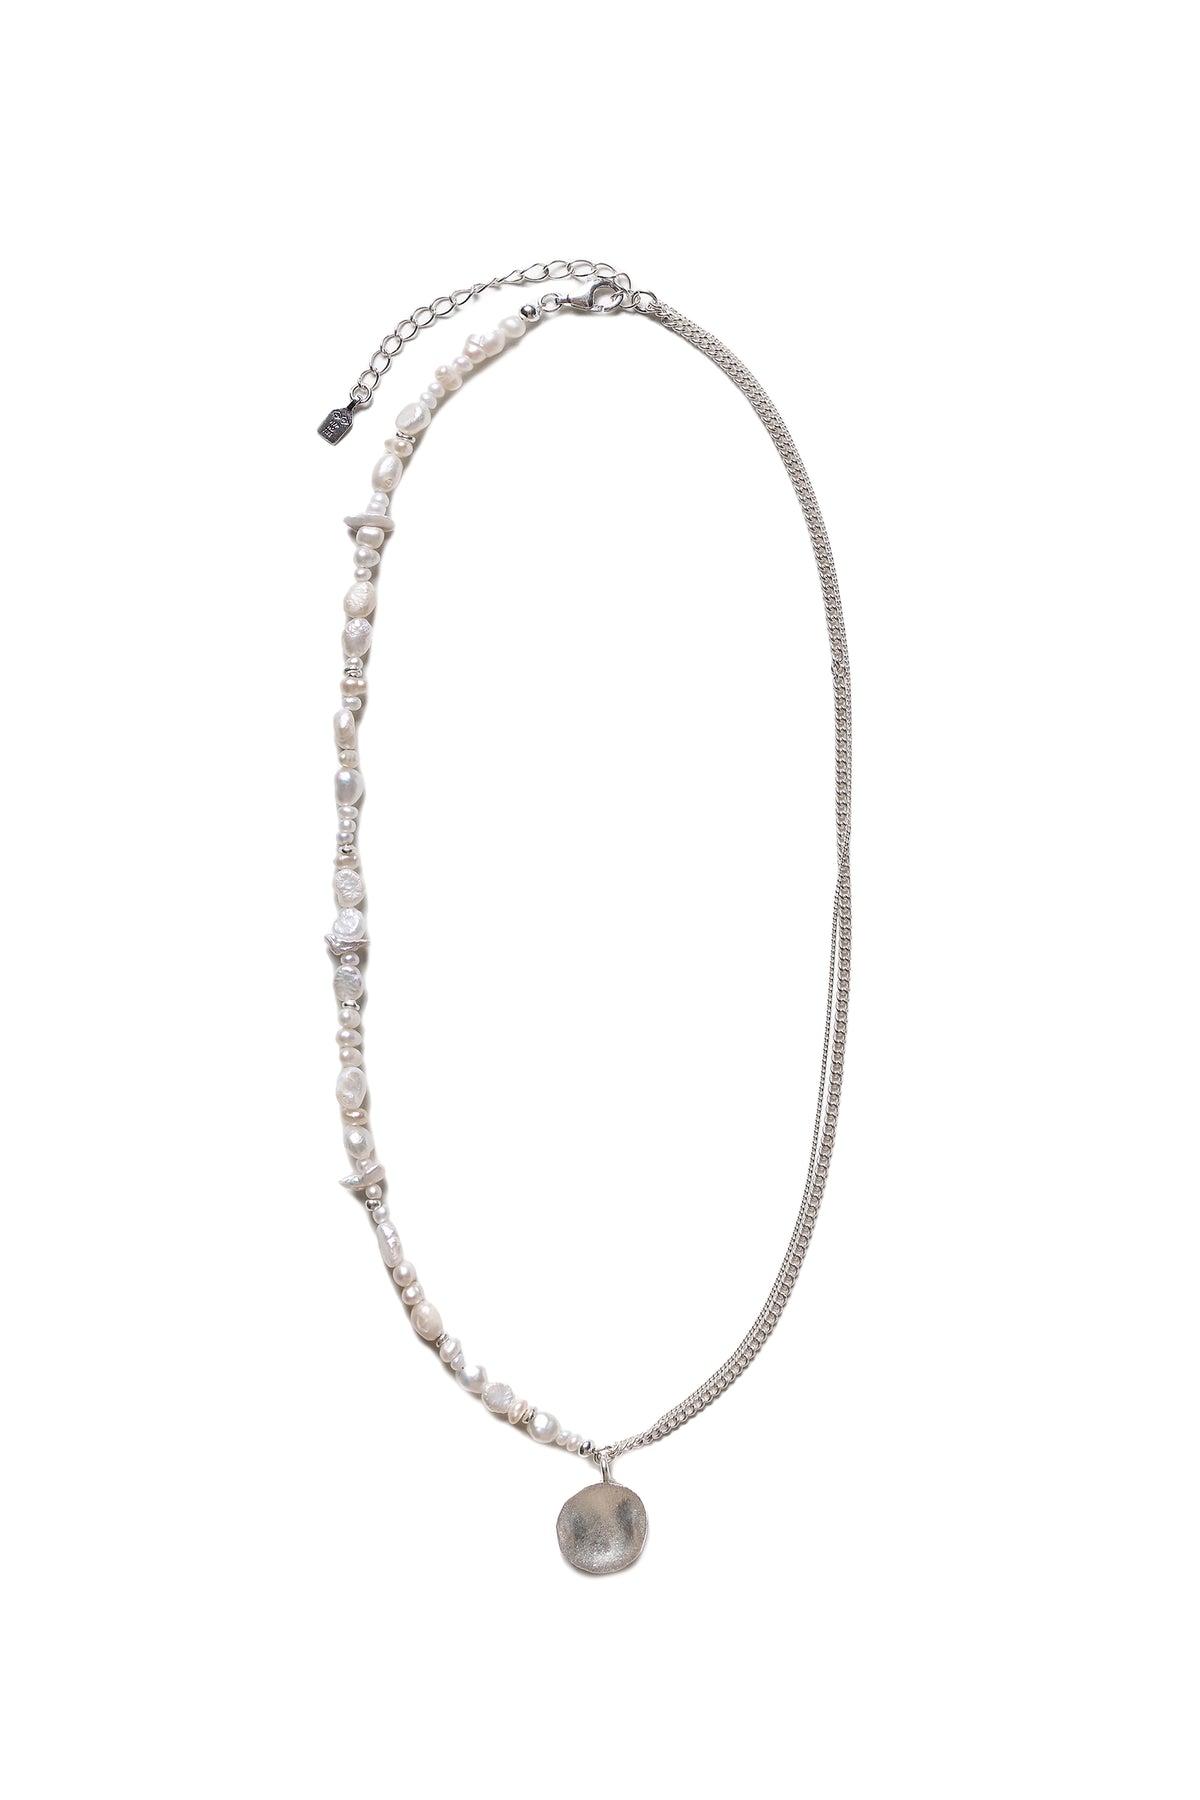 HYPNOTIZE MIX PEARL & CHAIN NECKLACE / SIL